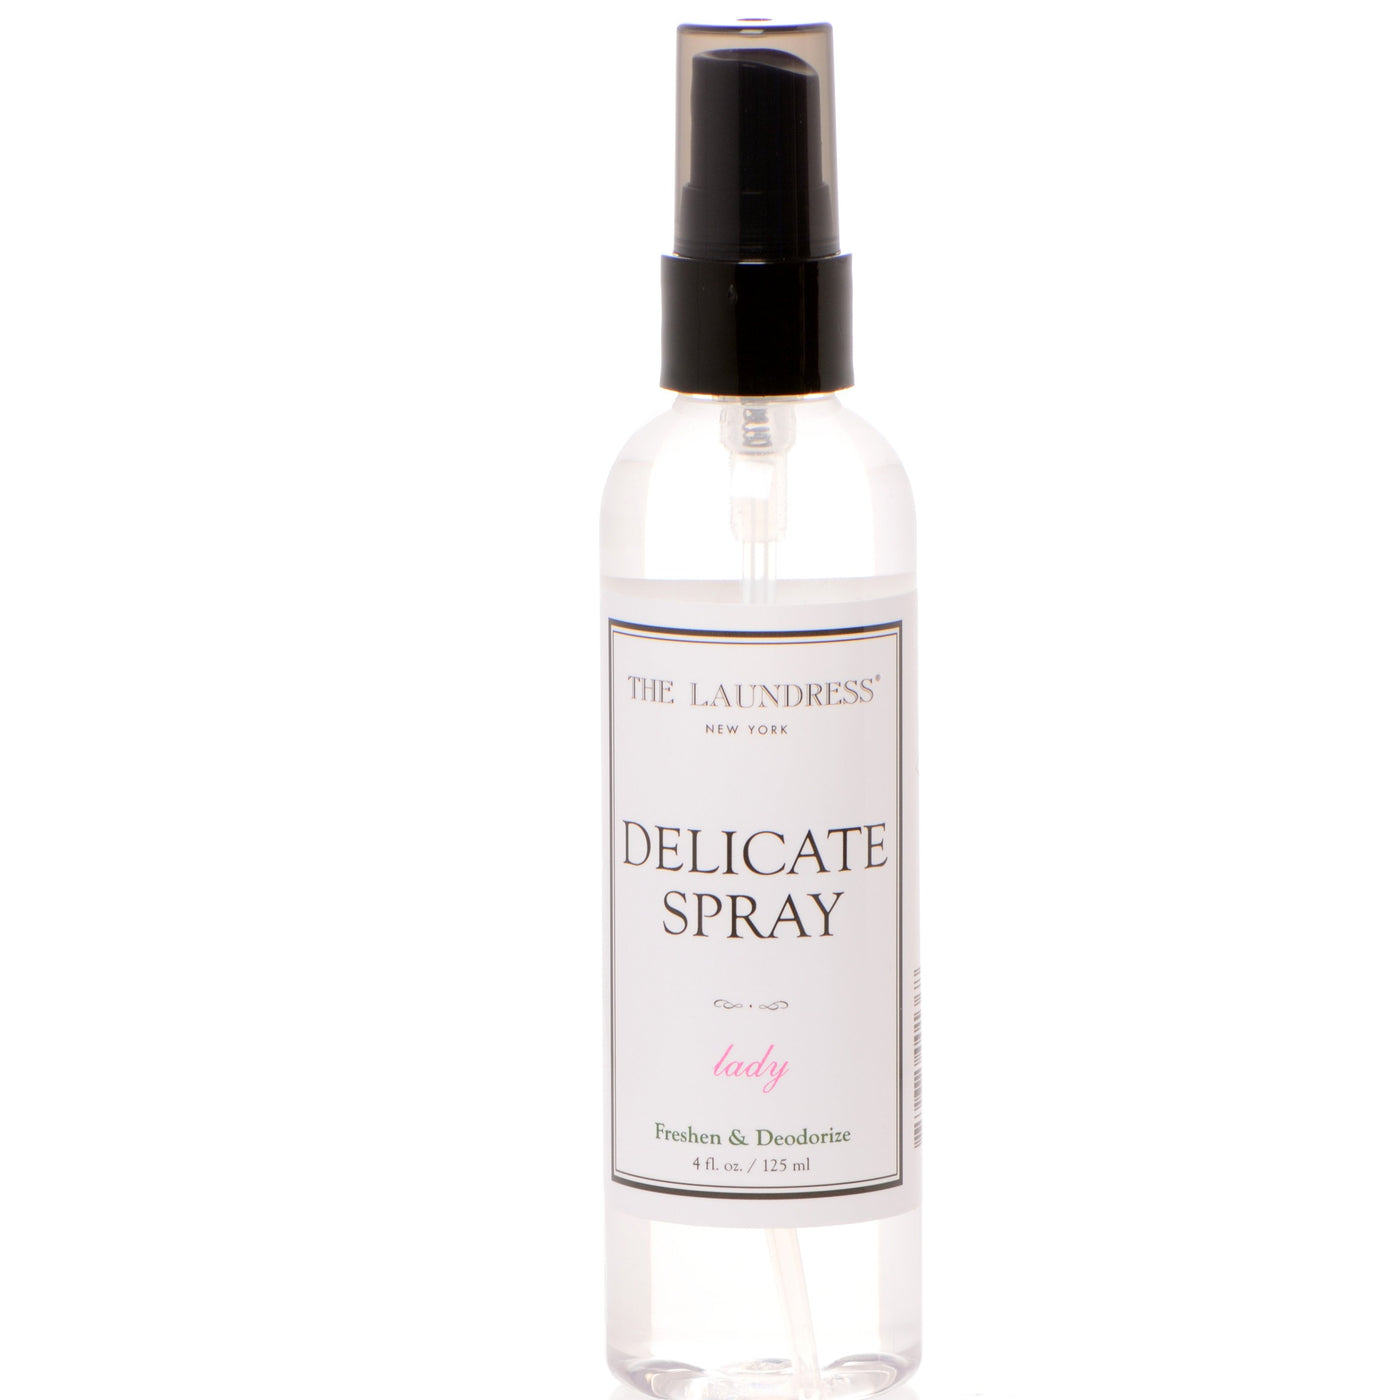 laundress, delicate spray, easy care, laundry solutions, laundry, stain remover, stain guard